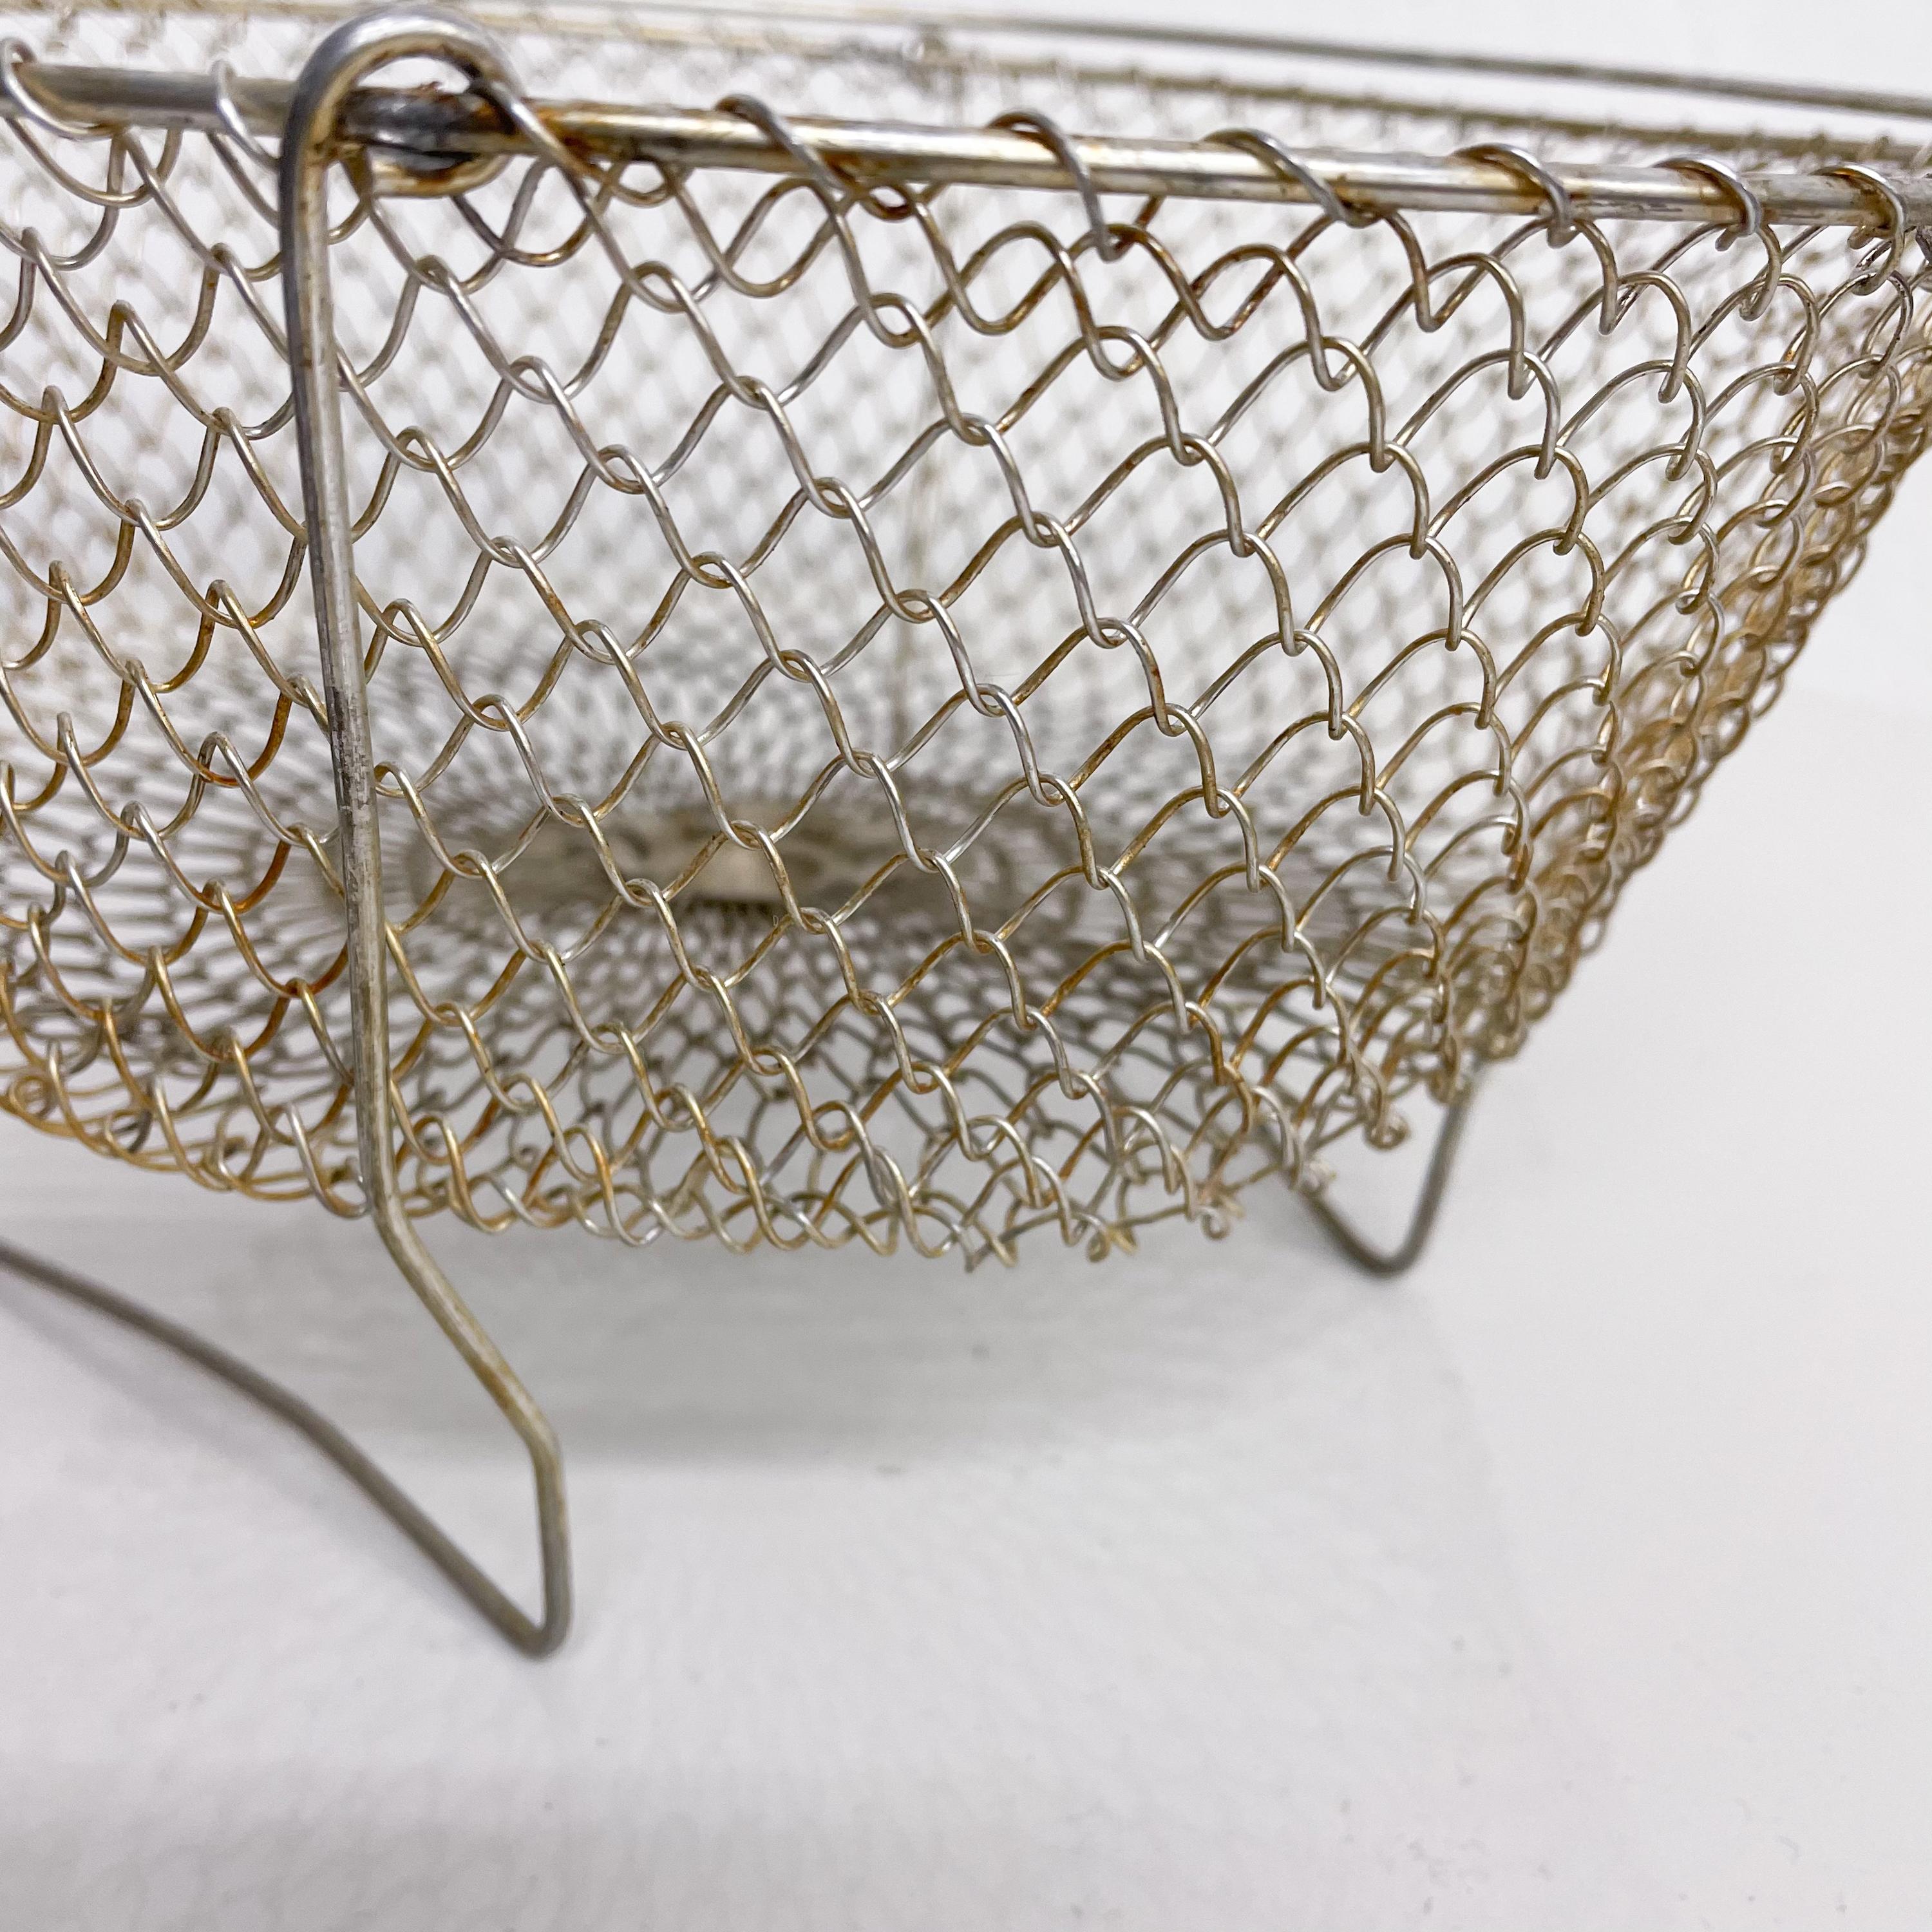 vintage collapsible wire egg basket